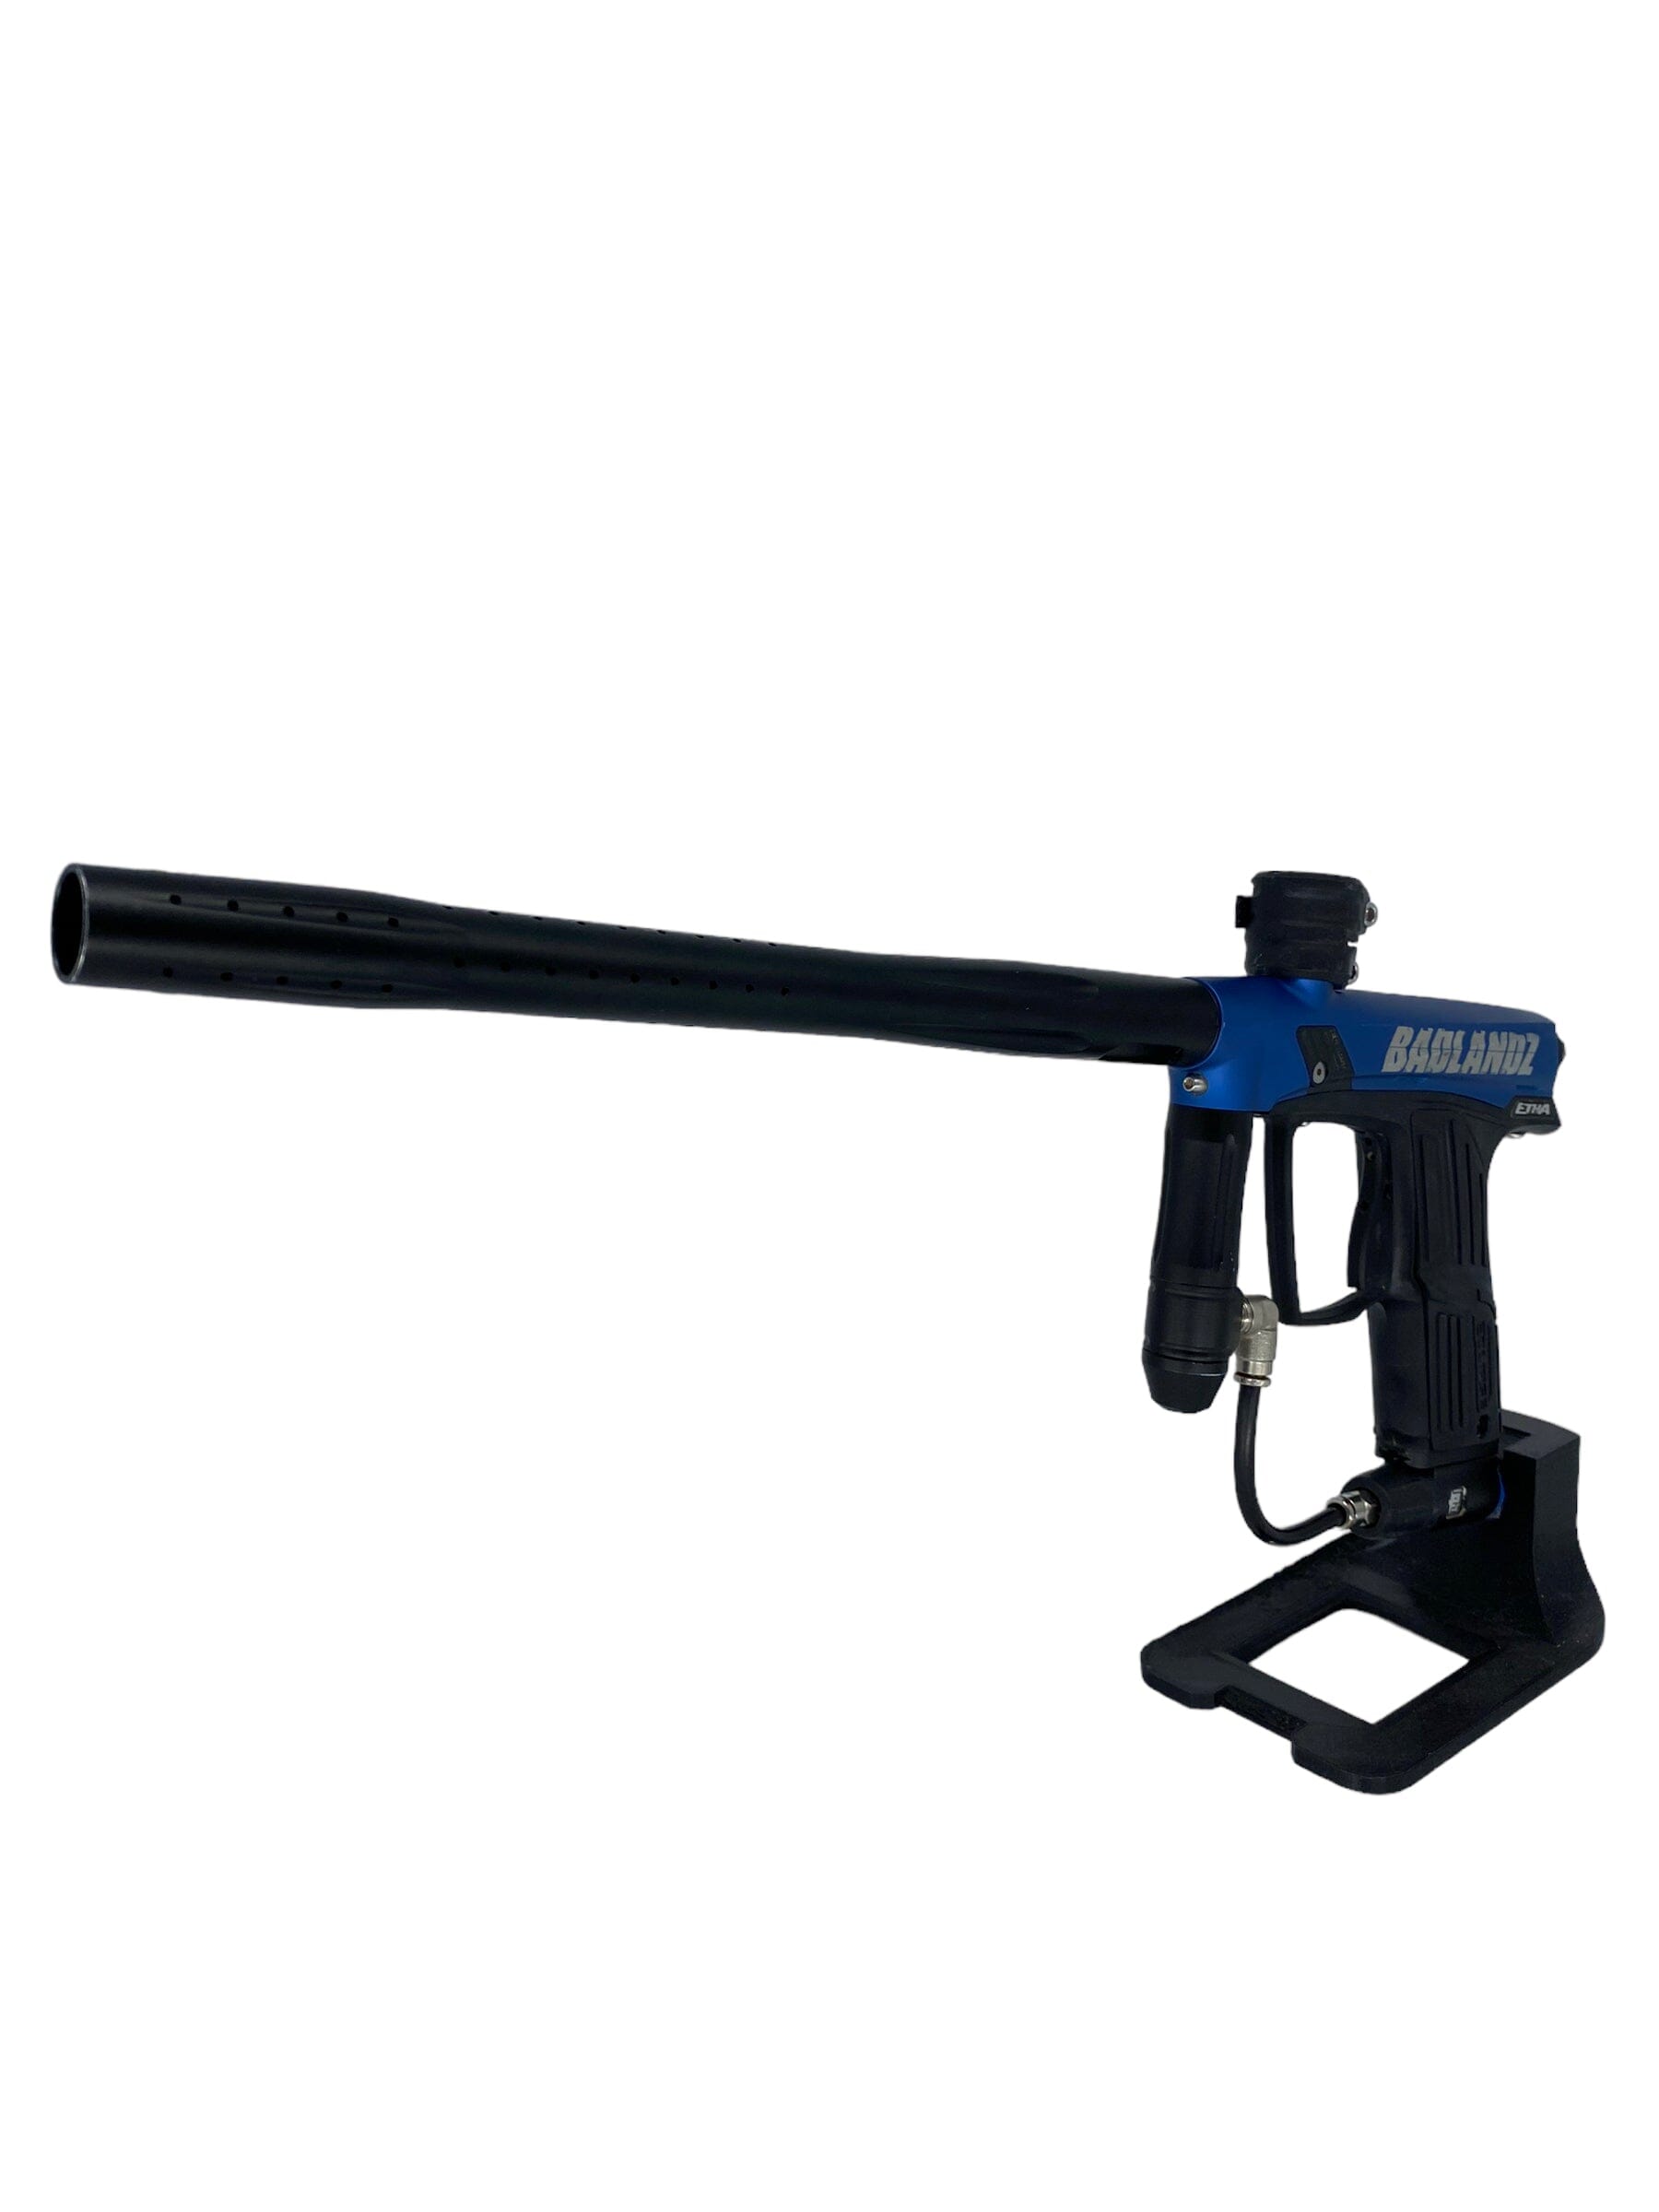 Used Planet Eclipse Etha Paintball Gun from CPXBrosPaintball Buy/Sell/Trade Paintball Markers, Paintball Hoppers, Paintball Masks, and Hormesis Headbands